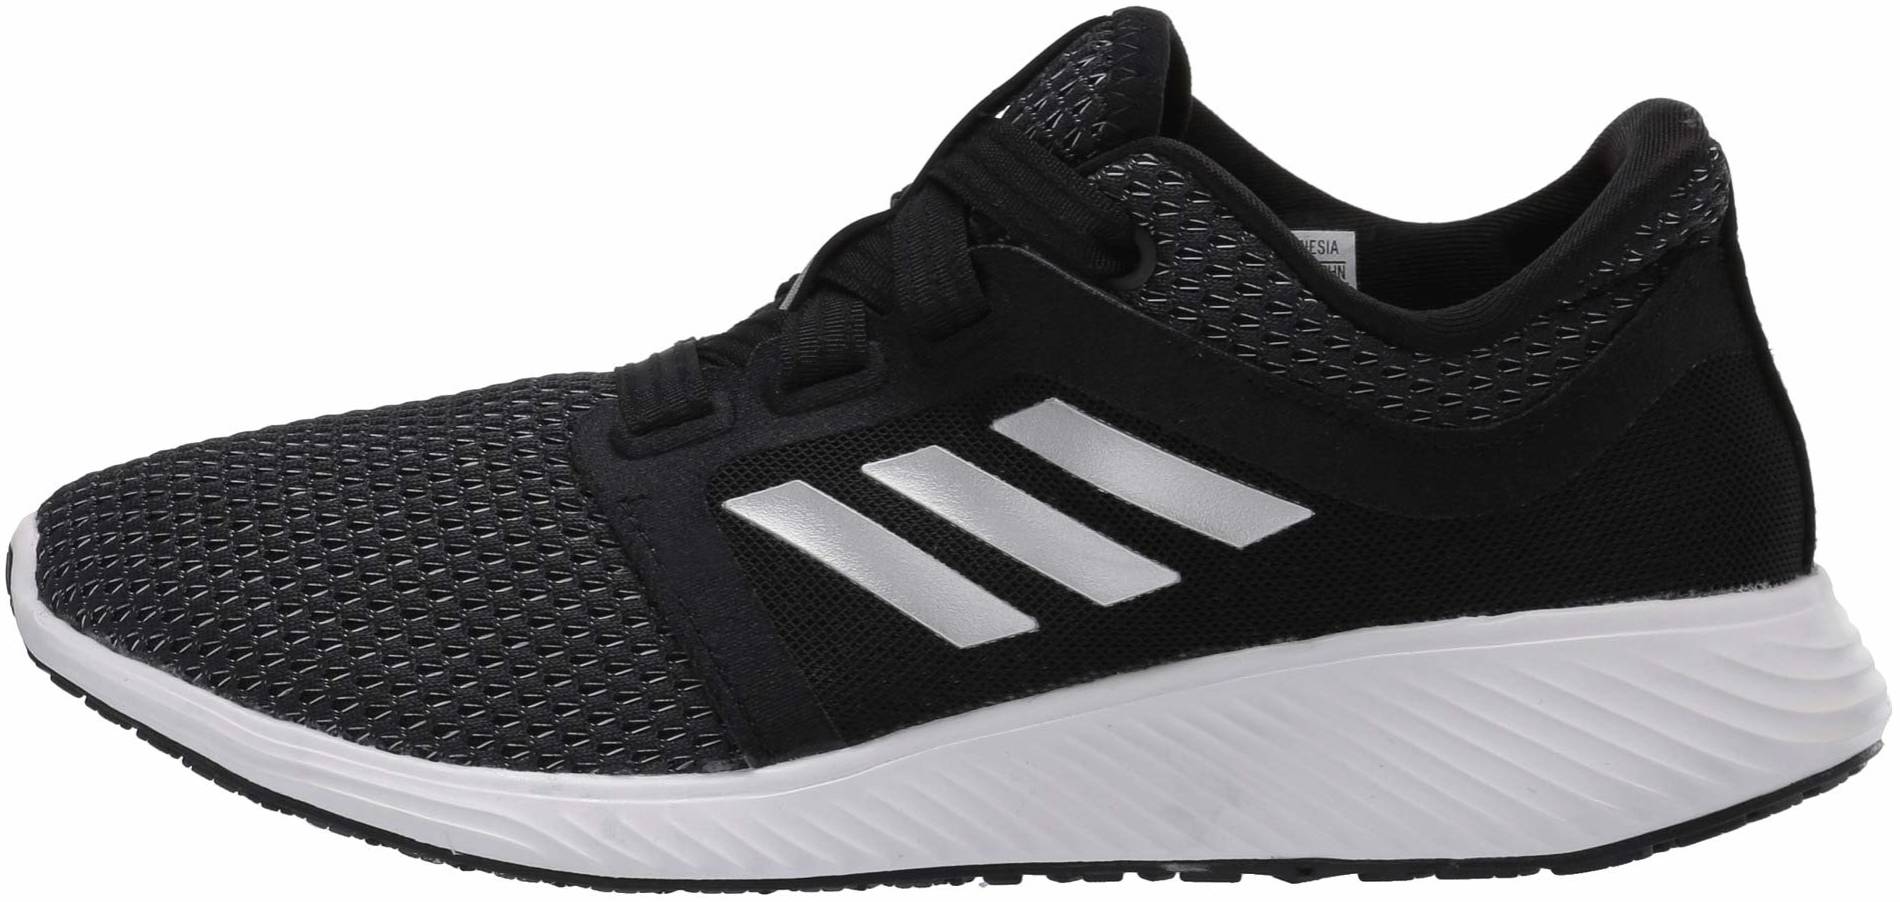 adidas edge lux 3 women's running shoes reviews